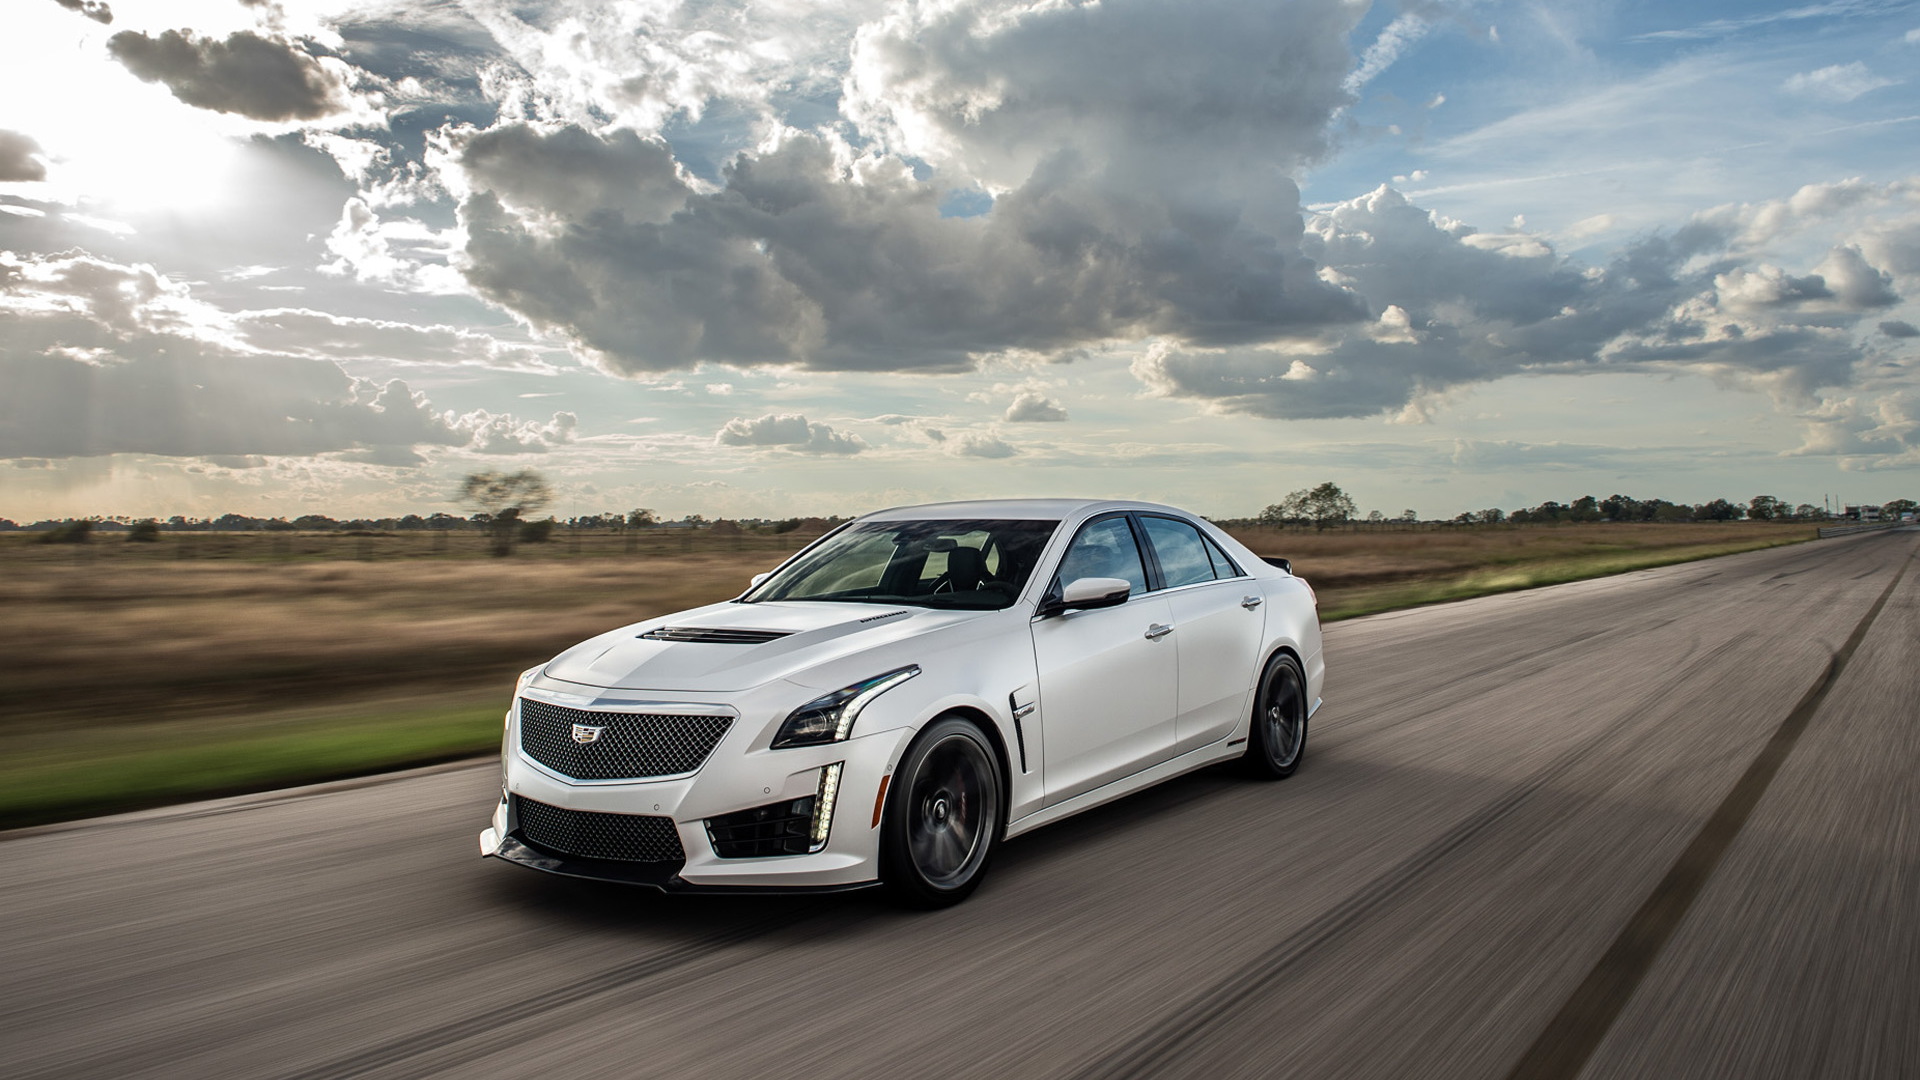 2018 Hennessey HPE1000 Cadillac CTS-V